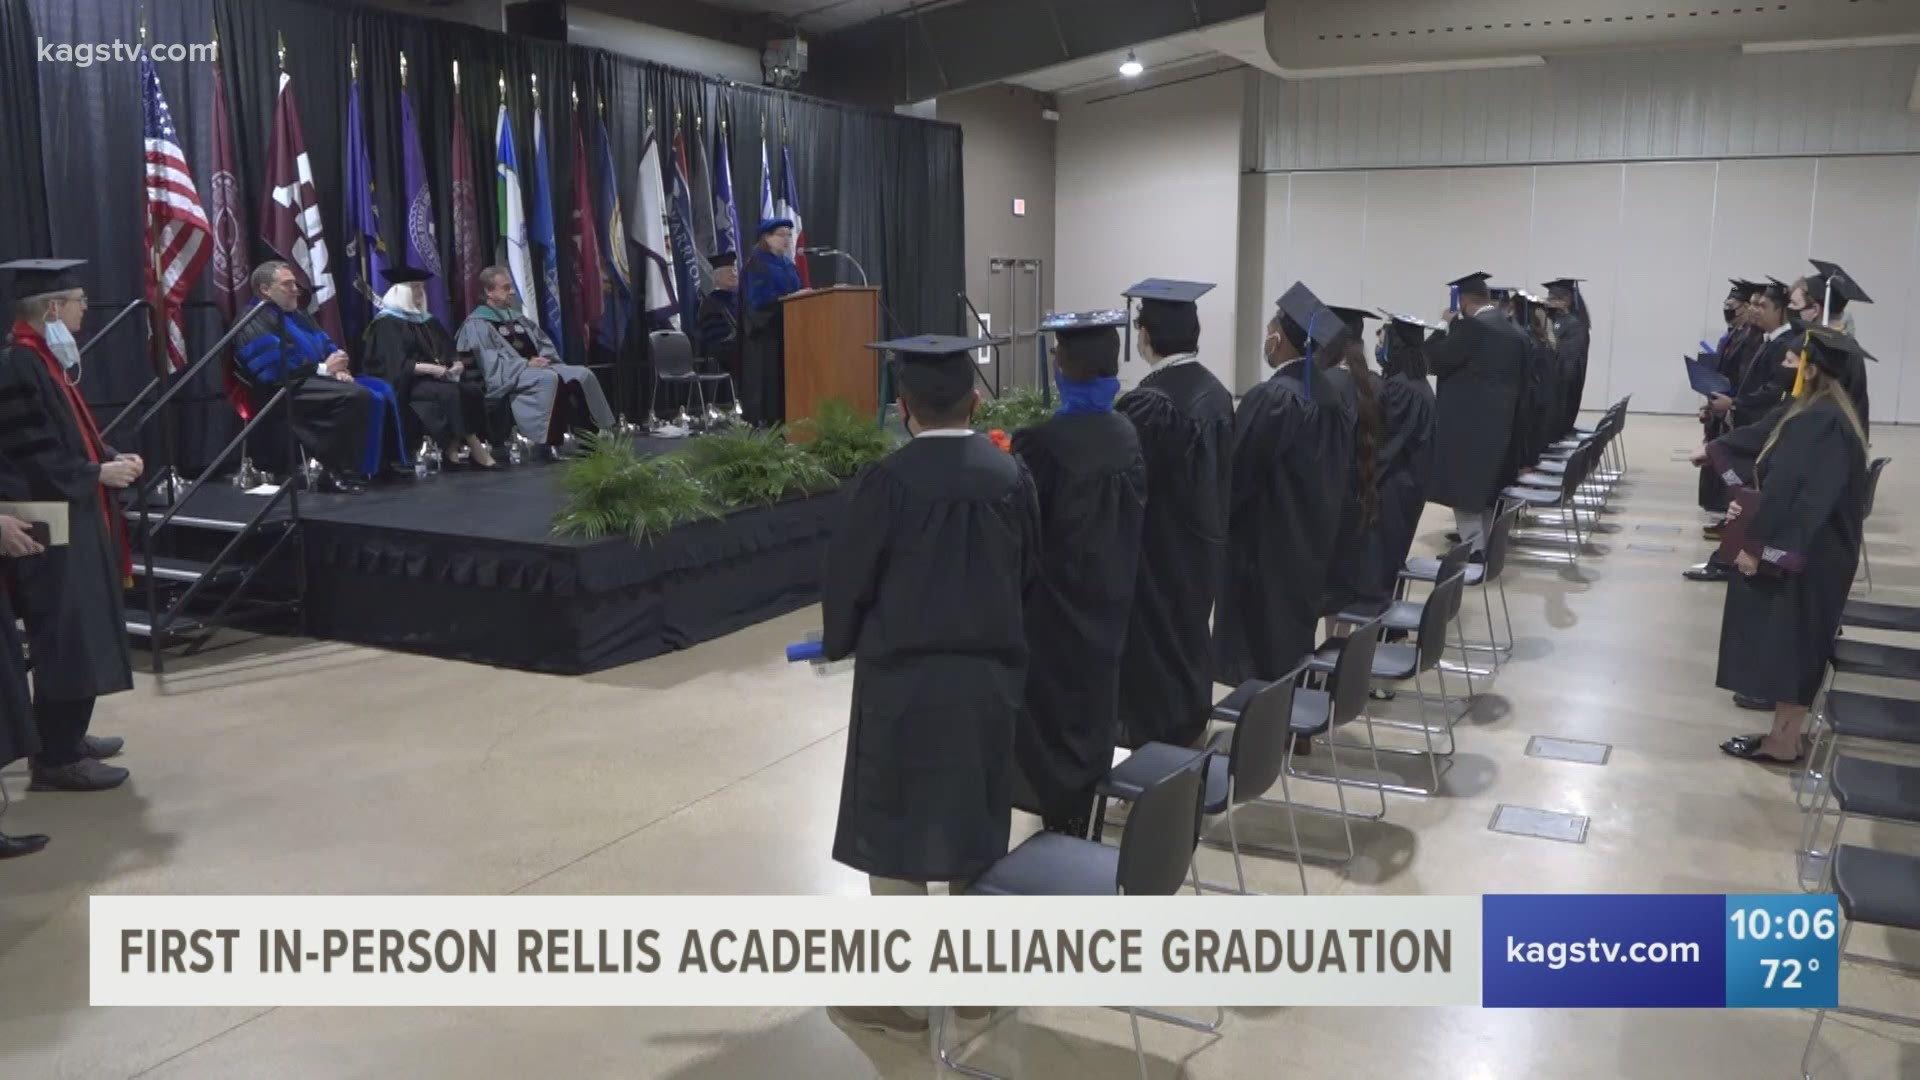 Class of 2020 and Class of 2021 made history today being the first people to graduate in-person from The Texas A&M University System RELLIS Campus.